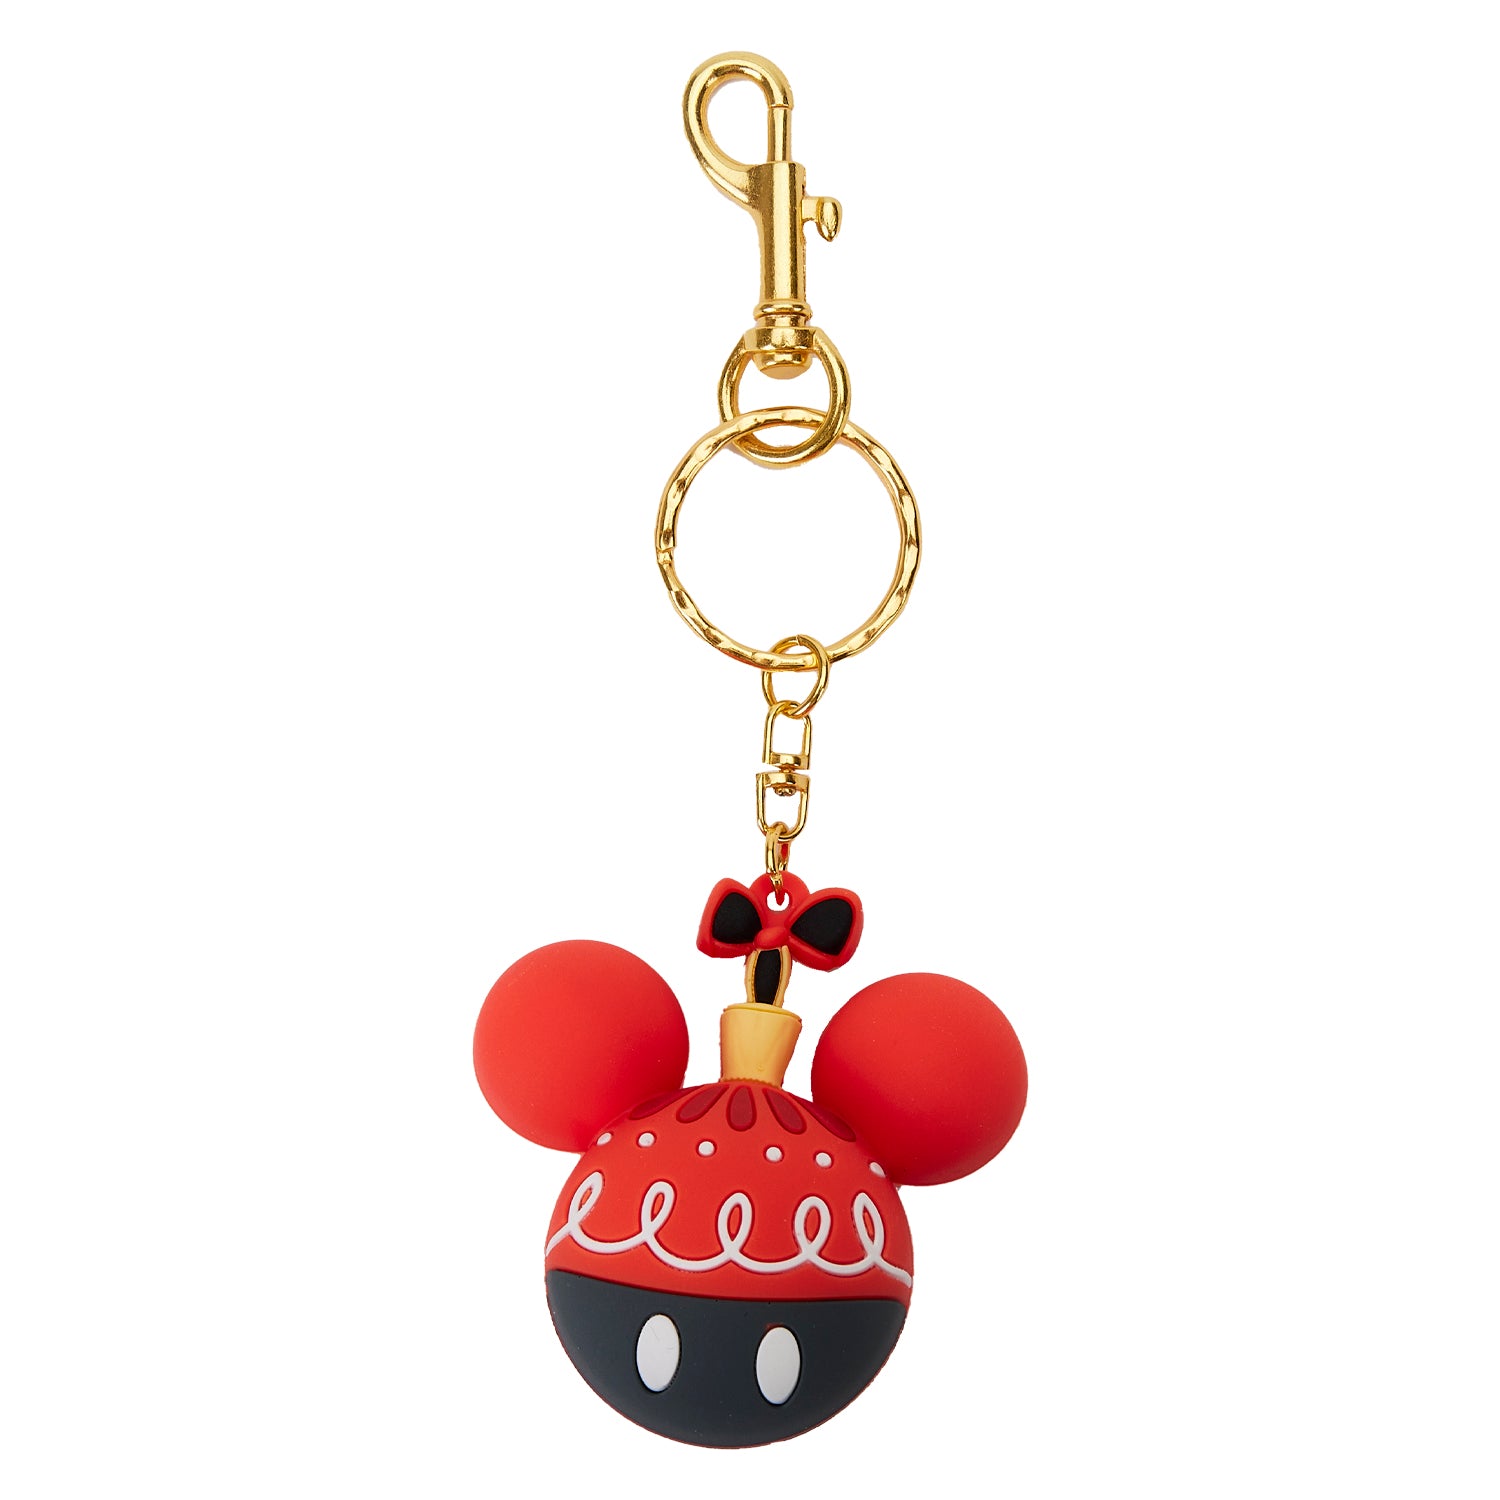 Buy Mickey Mouse Ornament Keychain at Loungefly.